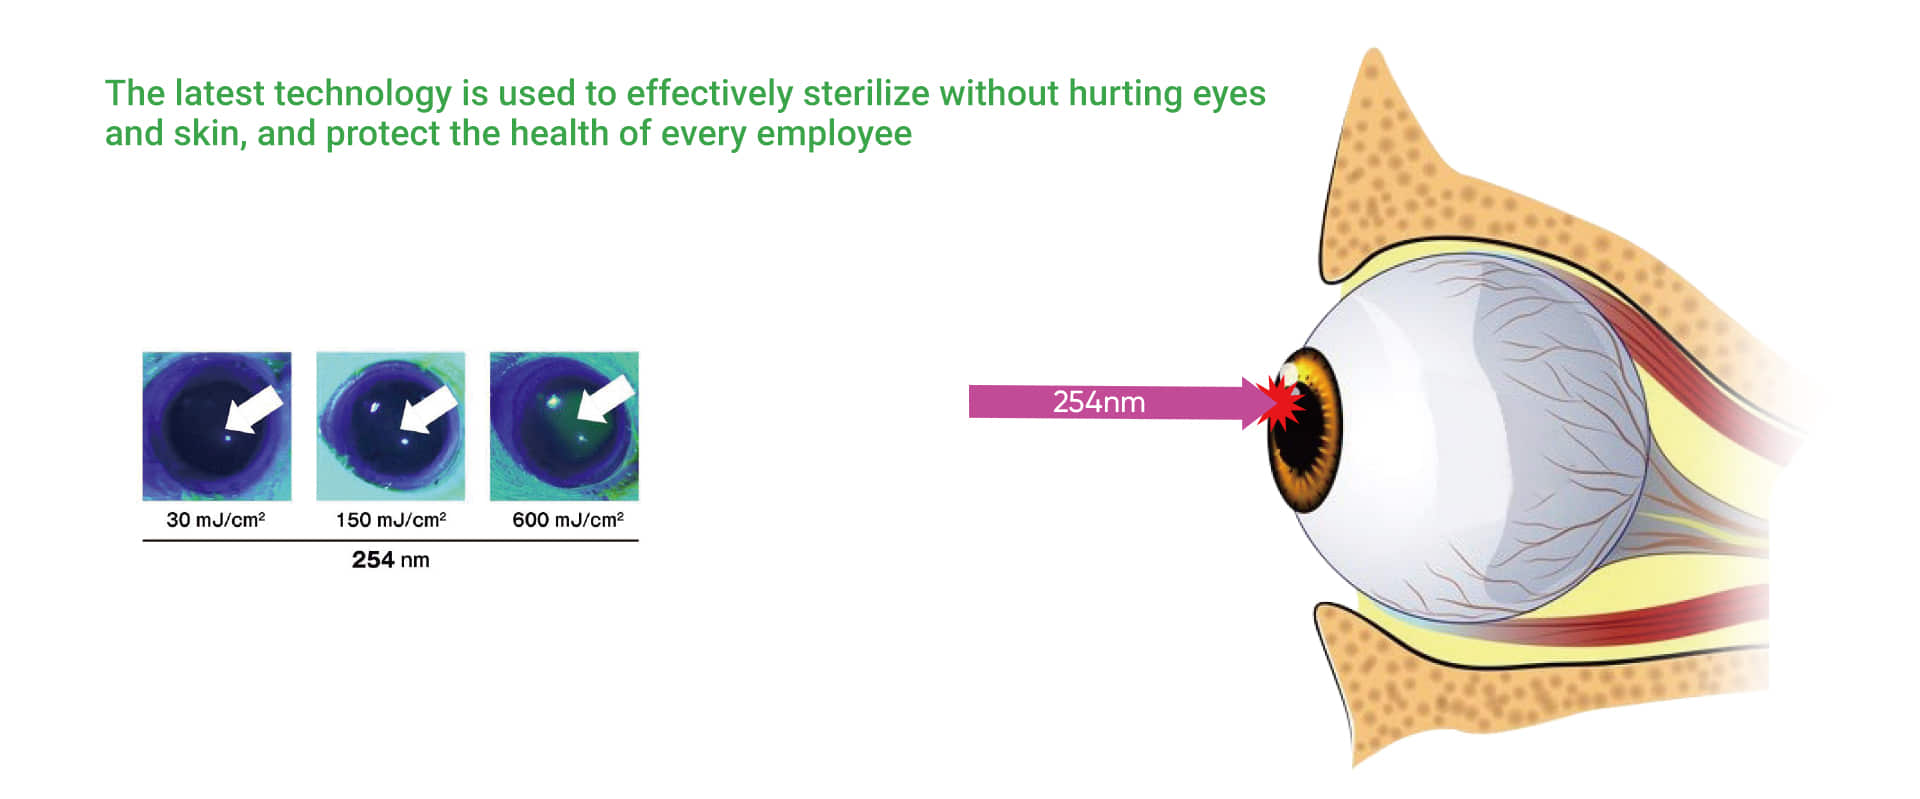 222nm technology is used to effectively sterilize without hurting eyes and skin